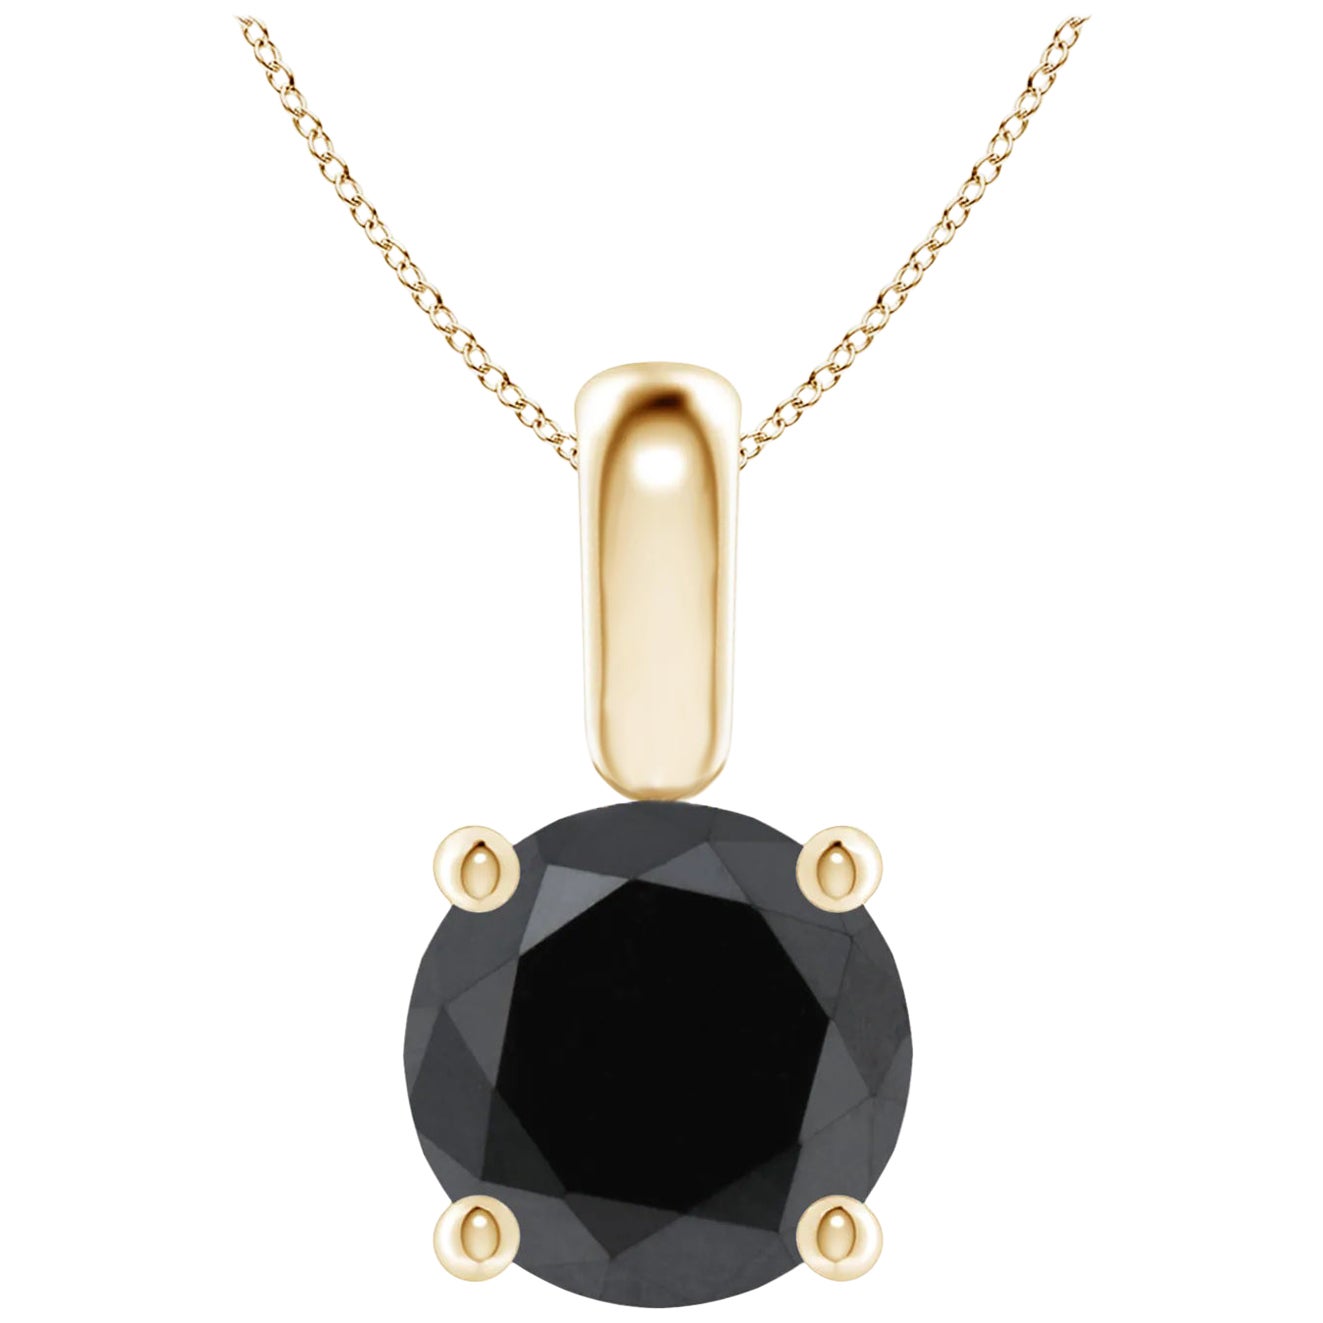 1.35 Carat Round Black Diamond Solitaire Pendant Necklace in 14K Yellow Gold